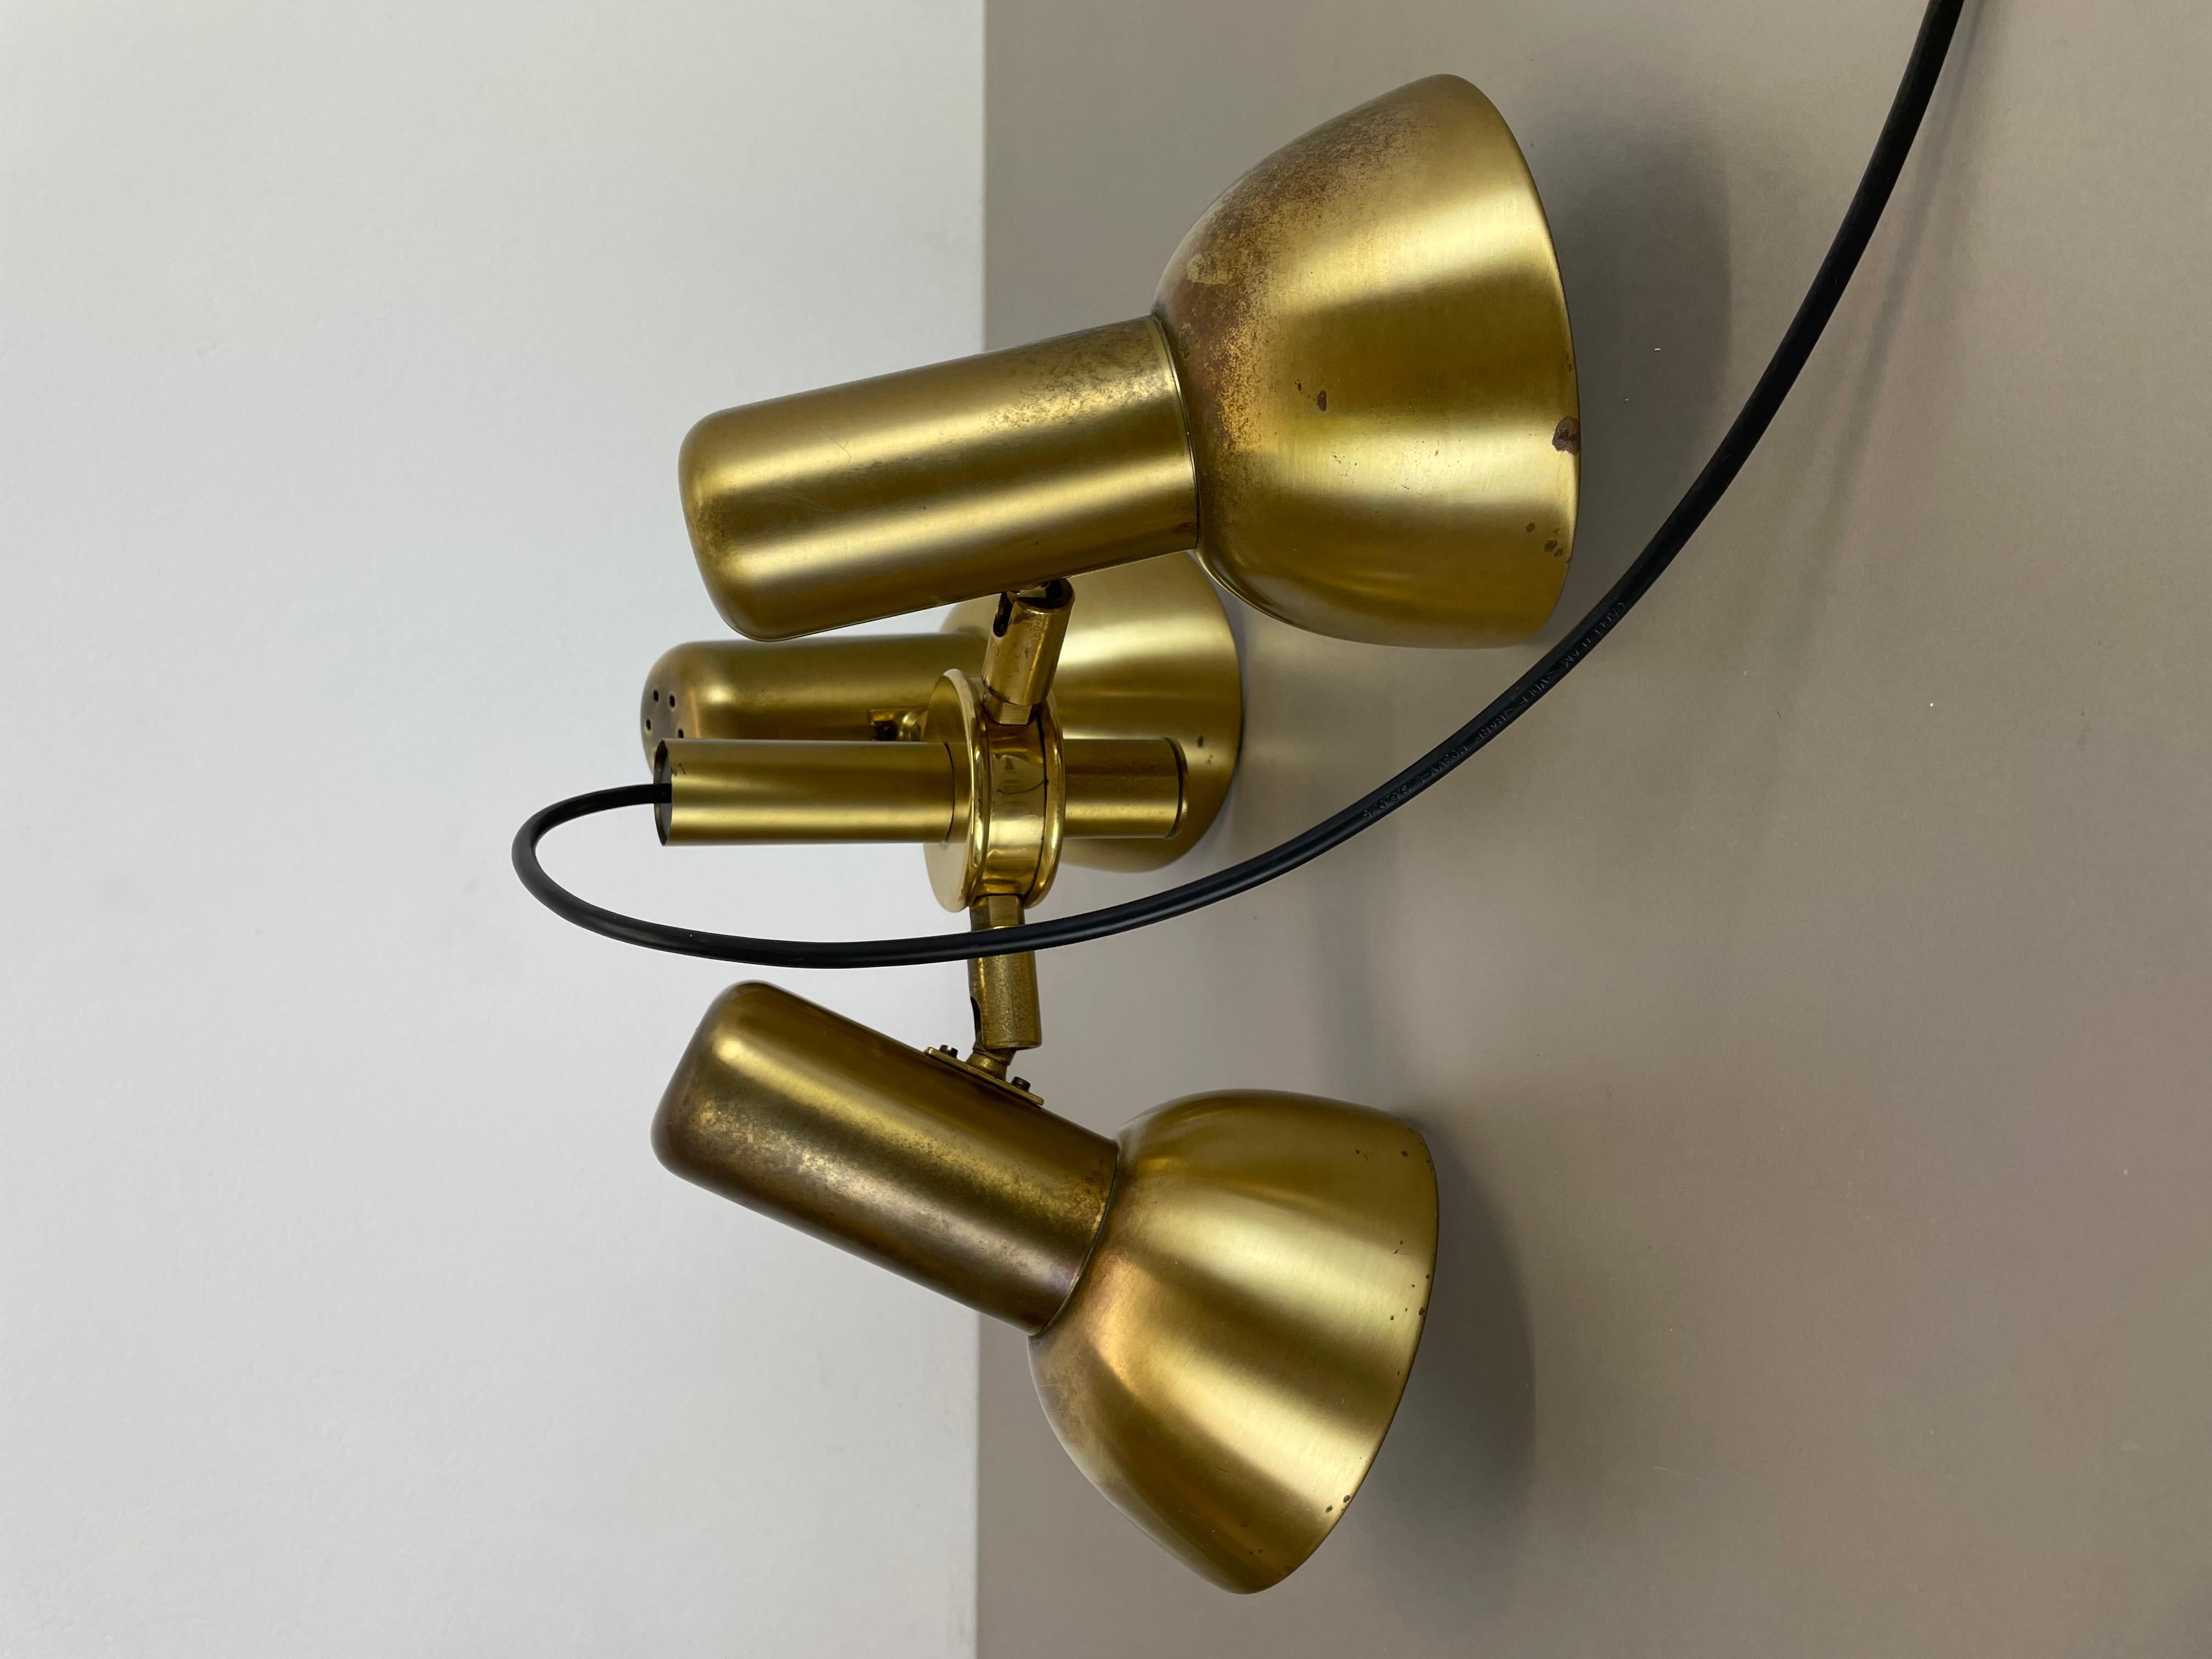 3-Spot Brass Tone Hanging Light Koch and Lowy Style OMI Lighting, Germany, 1970 For Sale 12